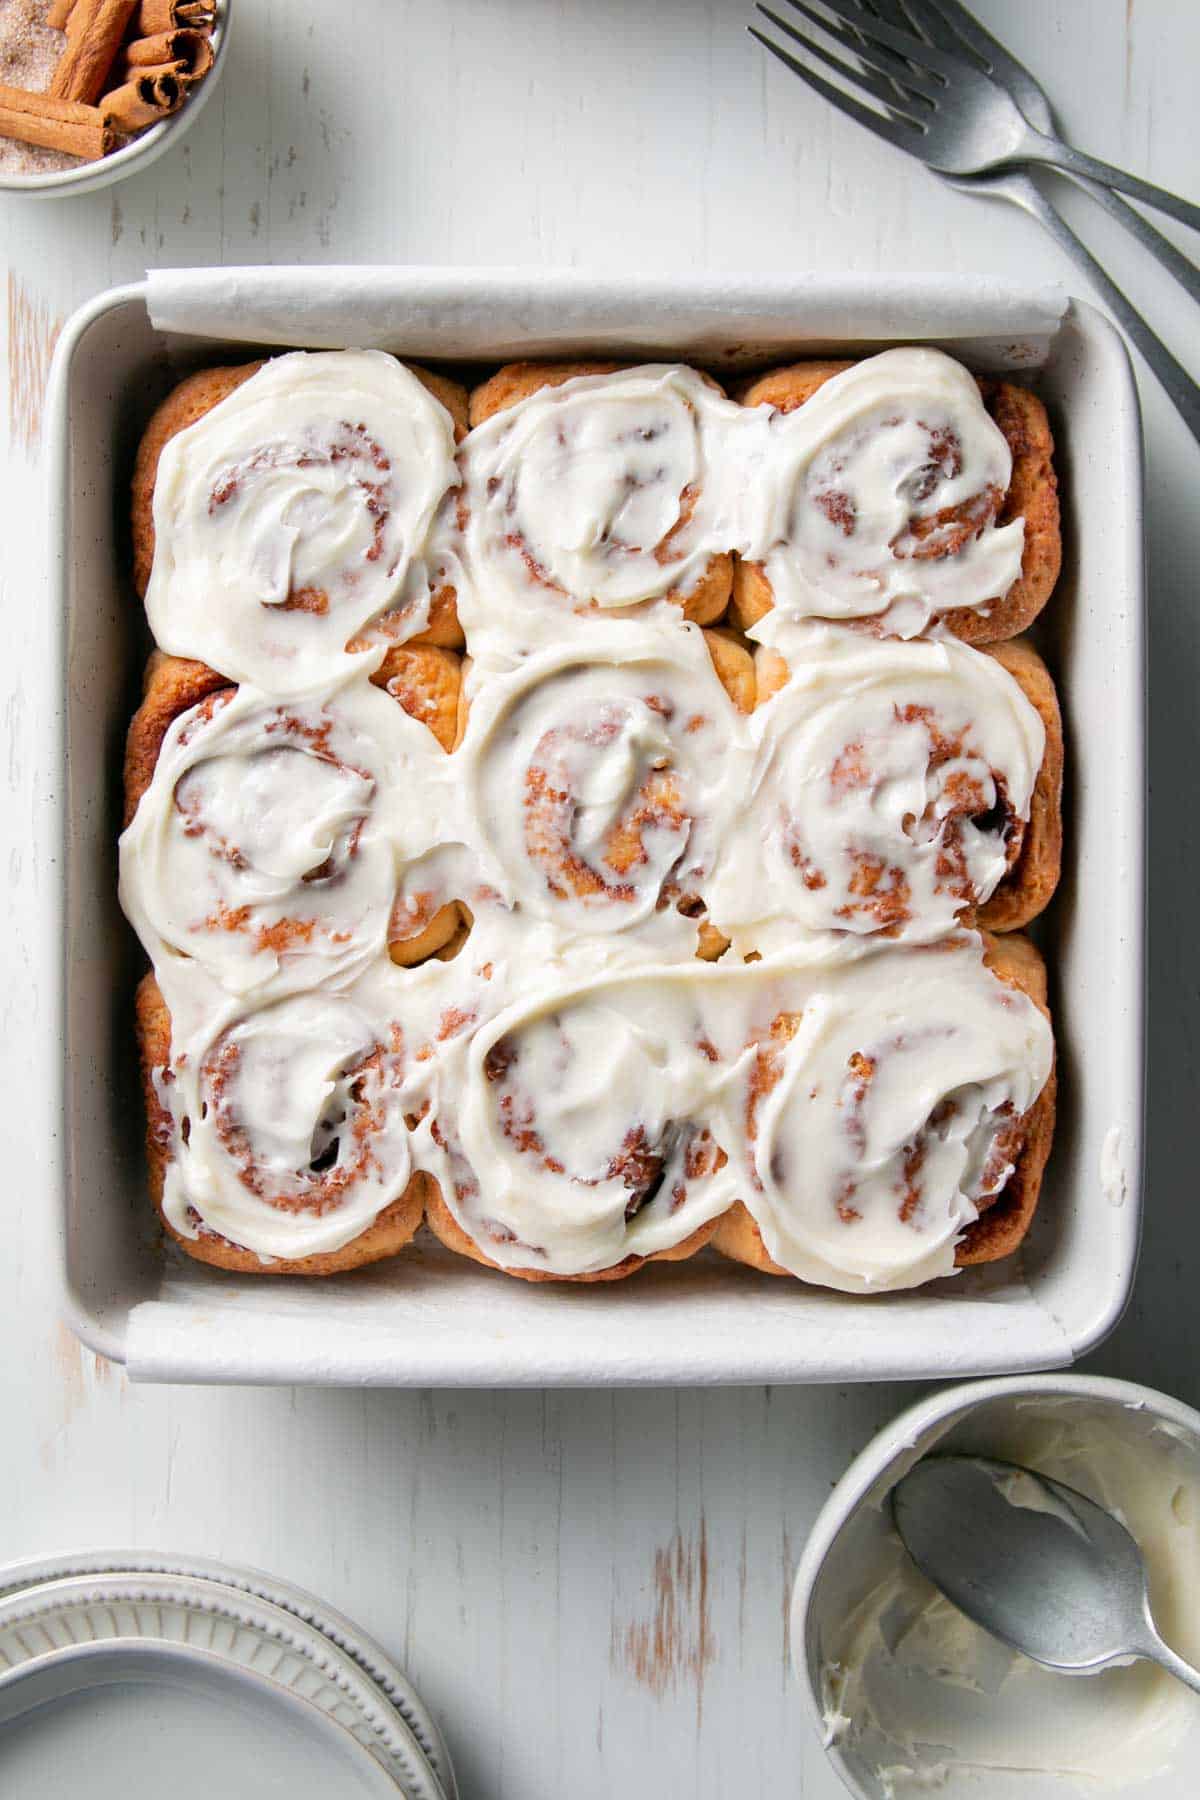 A square pan filled with baked cinnamon rolls topped with thick white frosting.